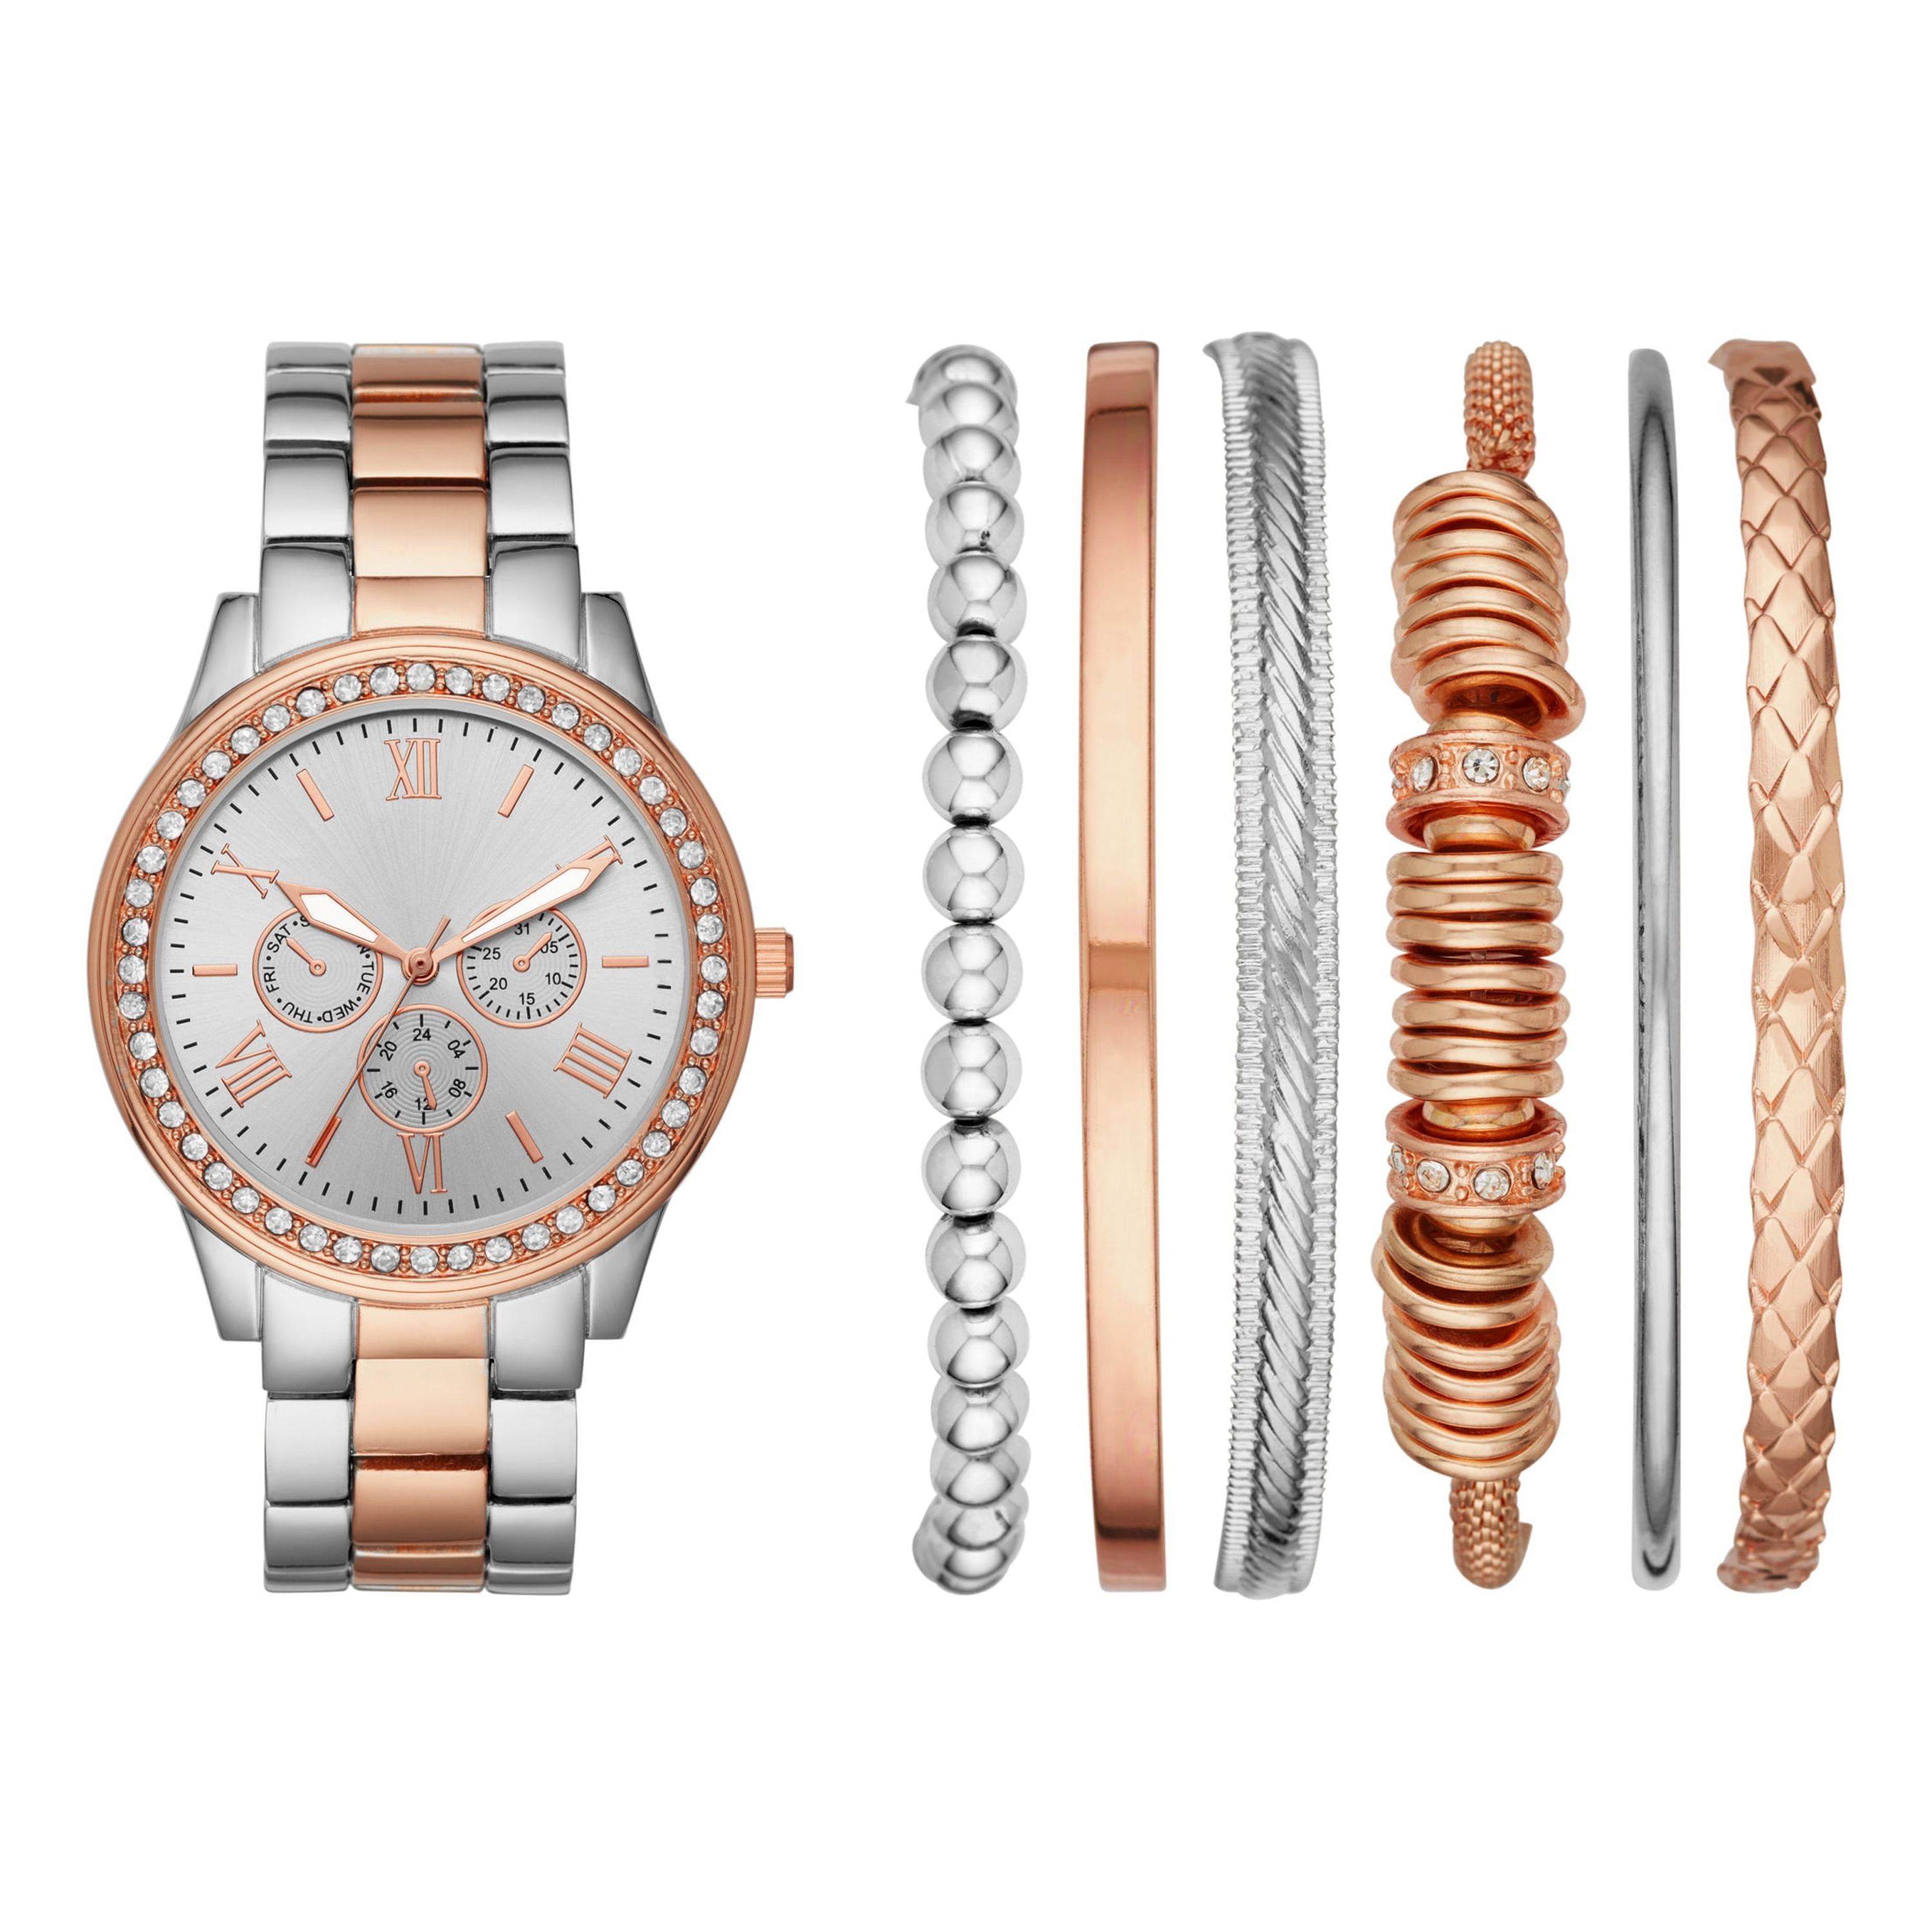 Ladies' Two-Tone Rose Gold and Silver Watch and Bracelet Gift Set ...